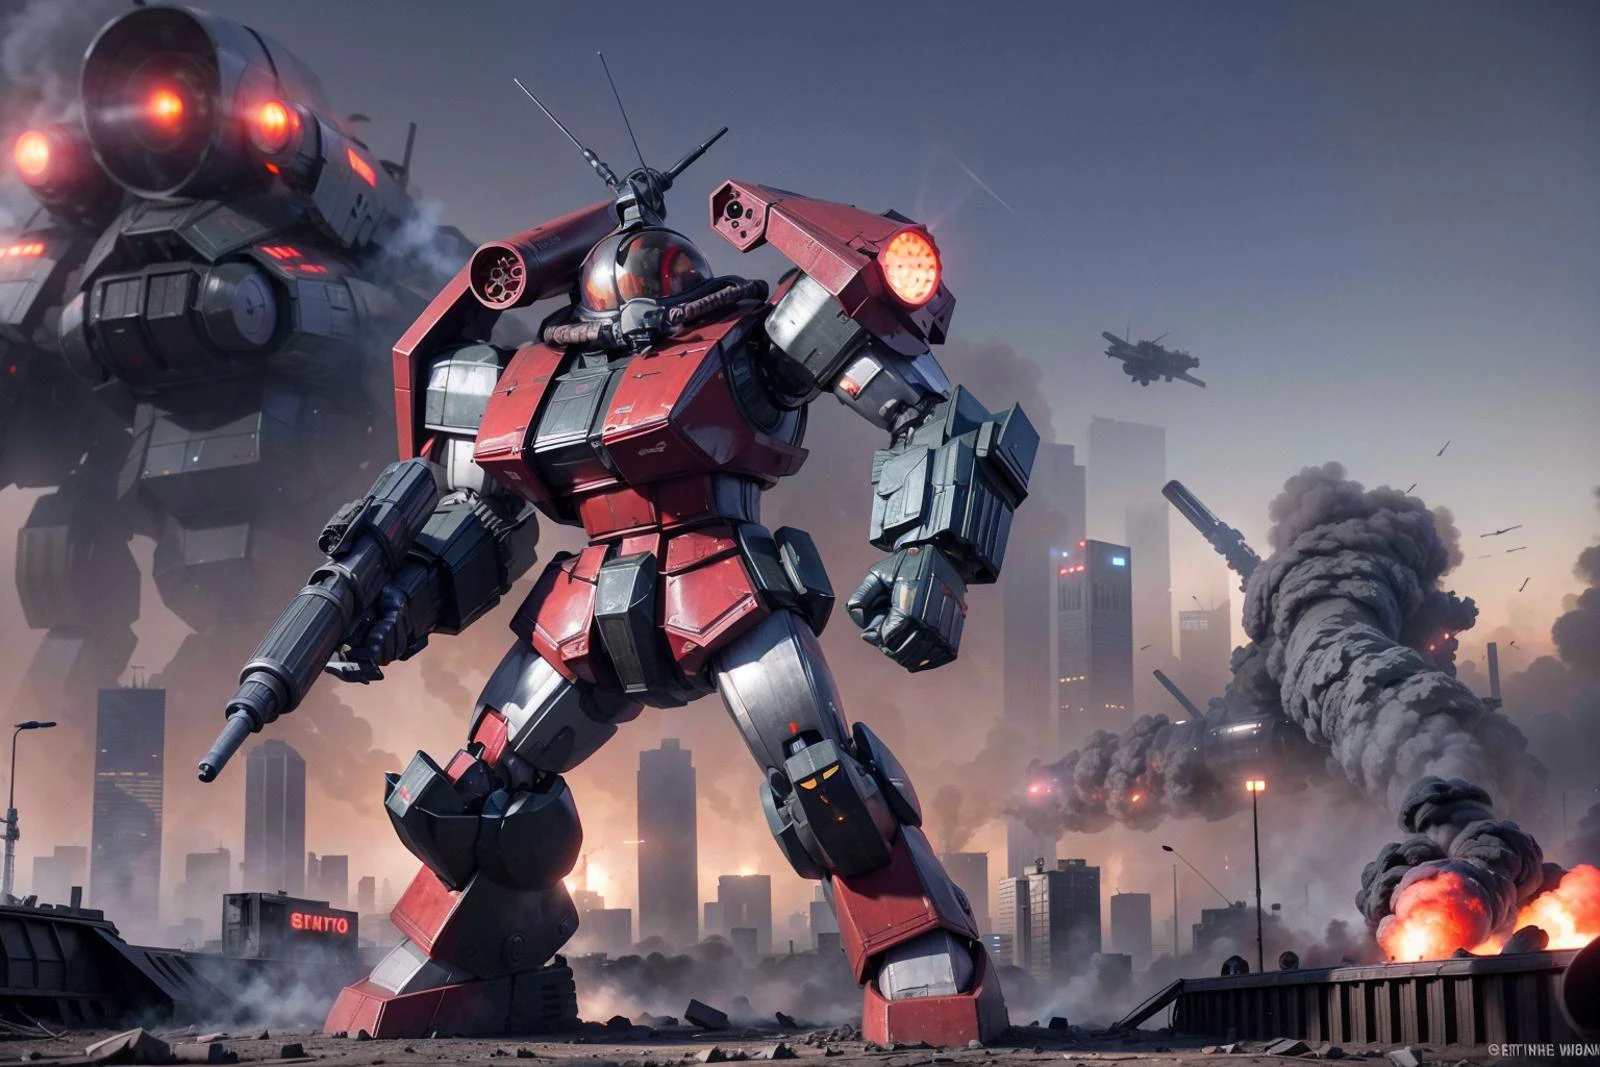 RAW photo of a  detailed  giant red and grey robot, firing a gun in its hand at enemy soldiers off in the distance, standing next to a freeway overpass, with a burning cityscape in the background, explosions, smoke, lasers firing in the sky,  